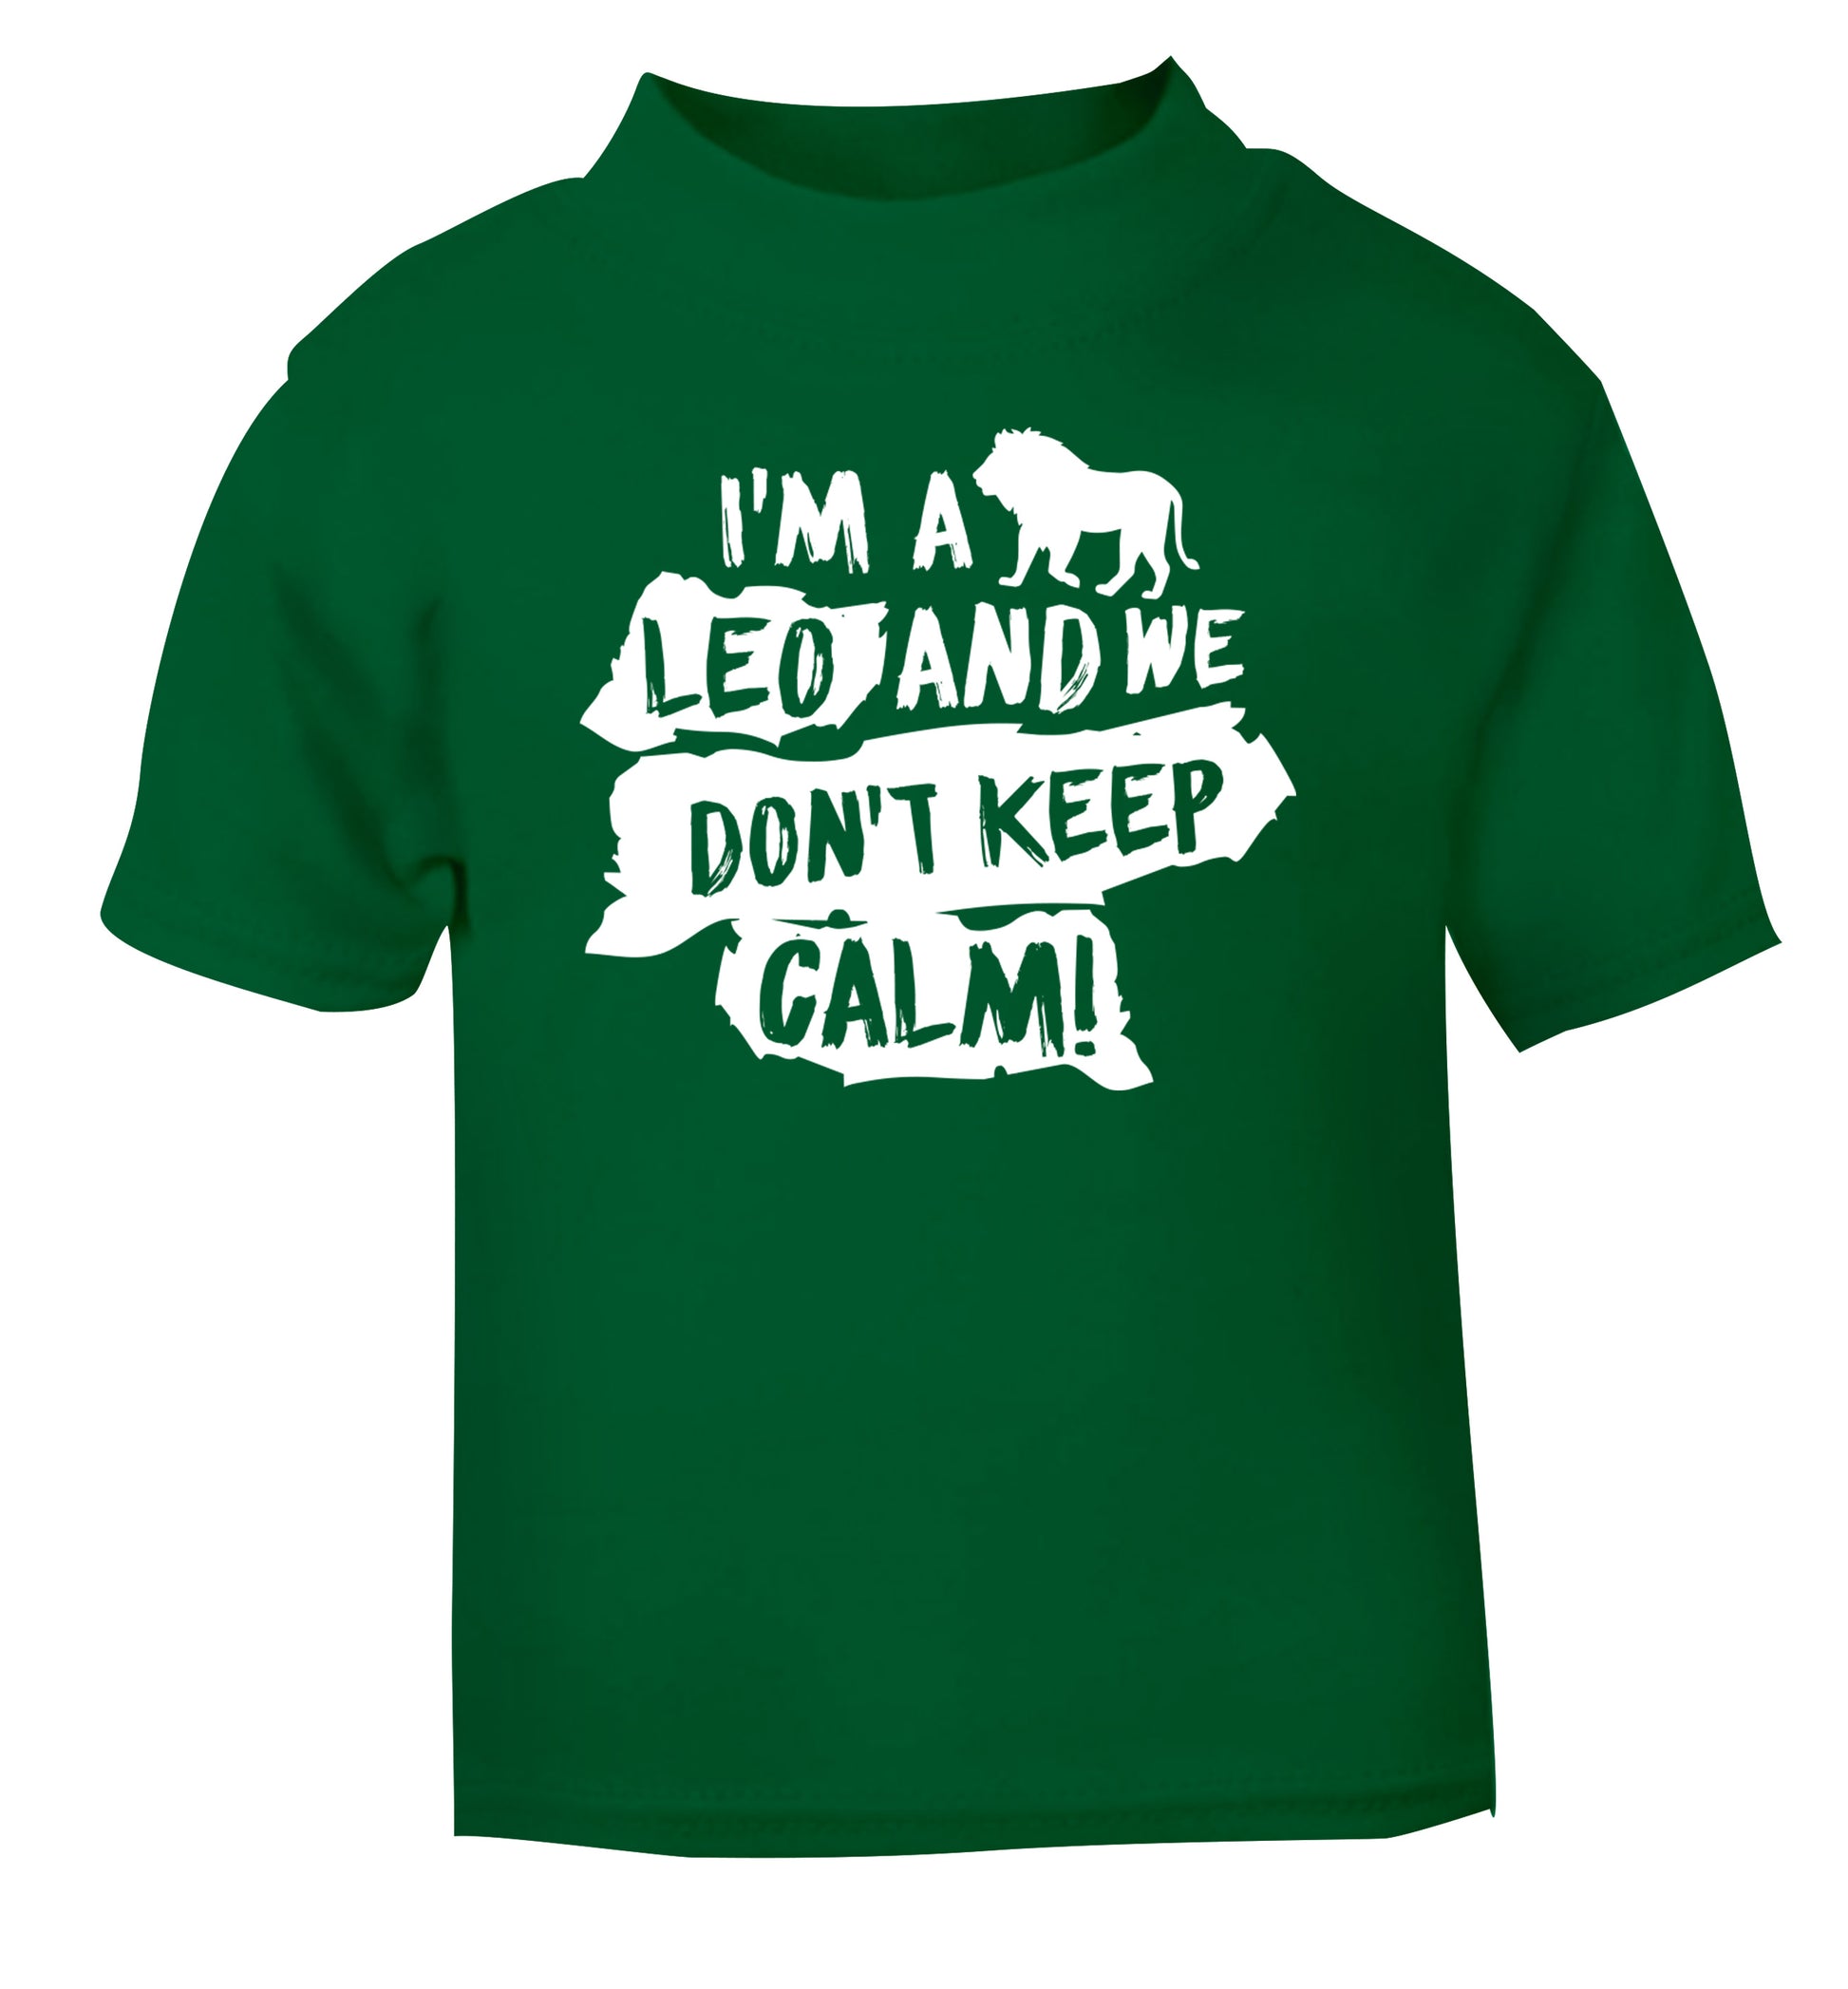 I'm a leo and we don't keep calm! green Baby Toddler Tshirt 2 Years